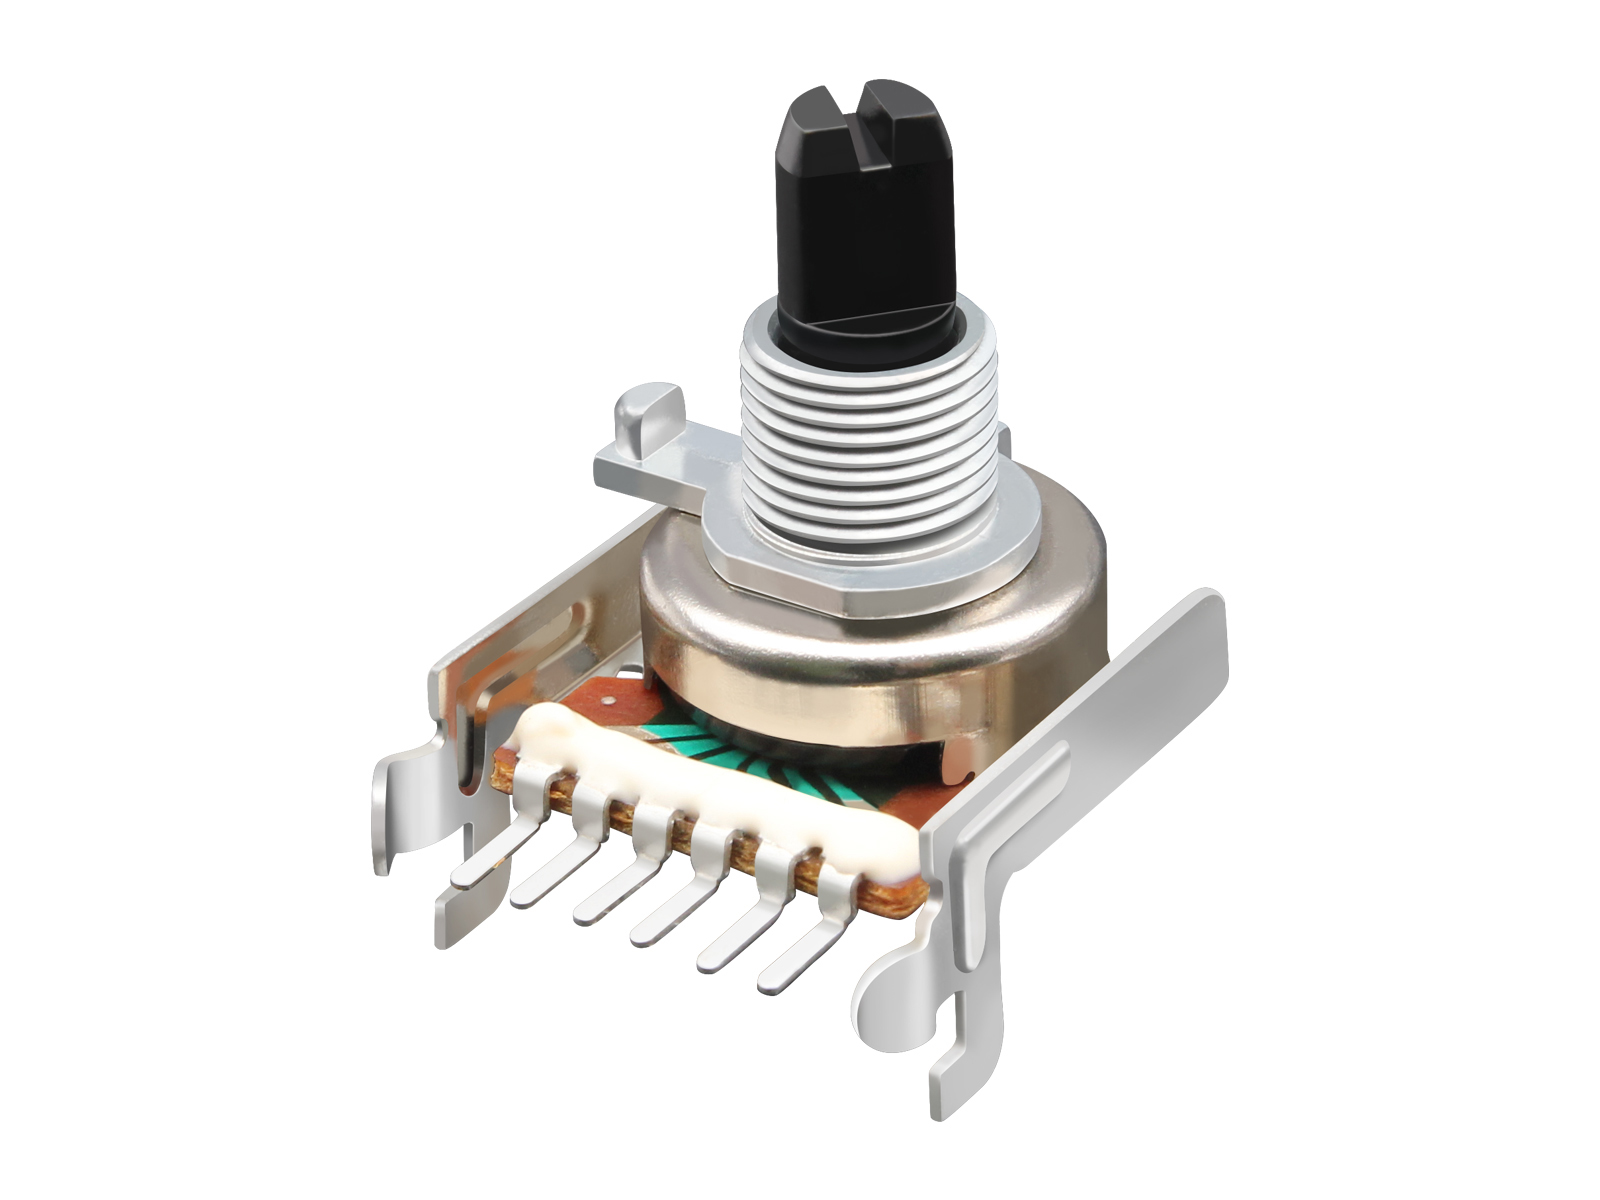 RB16 rotary potentiometers